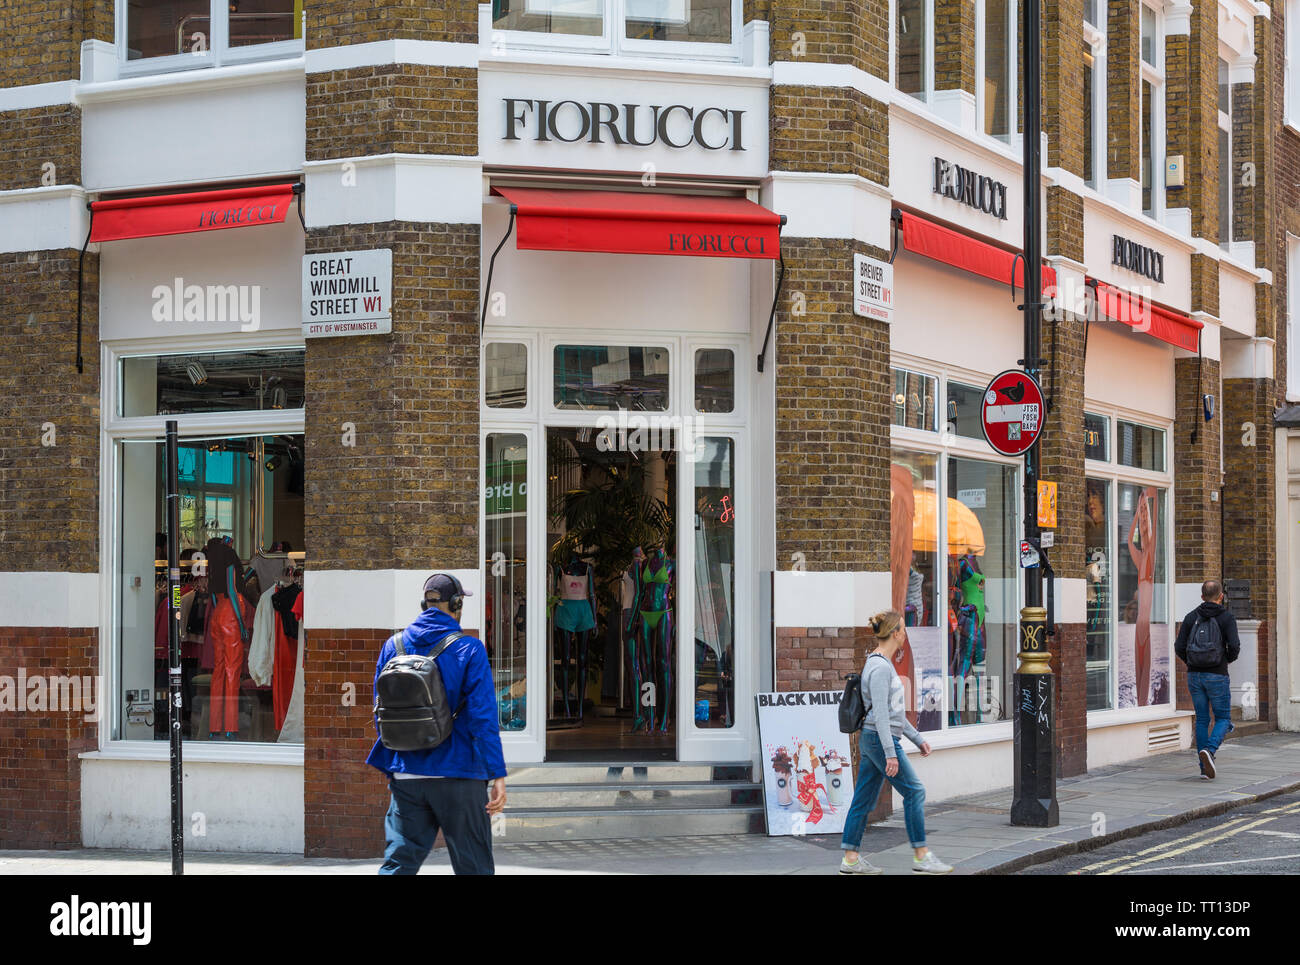 Fiorucci clothing shop on the corner of Brewer Street and Great windmill  Street, Soho, London Stock Photo - Alamy